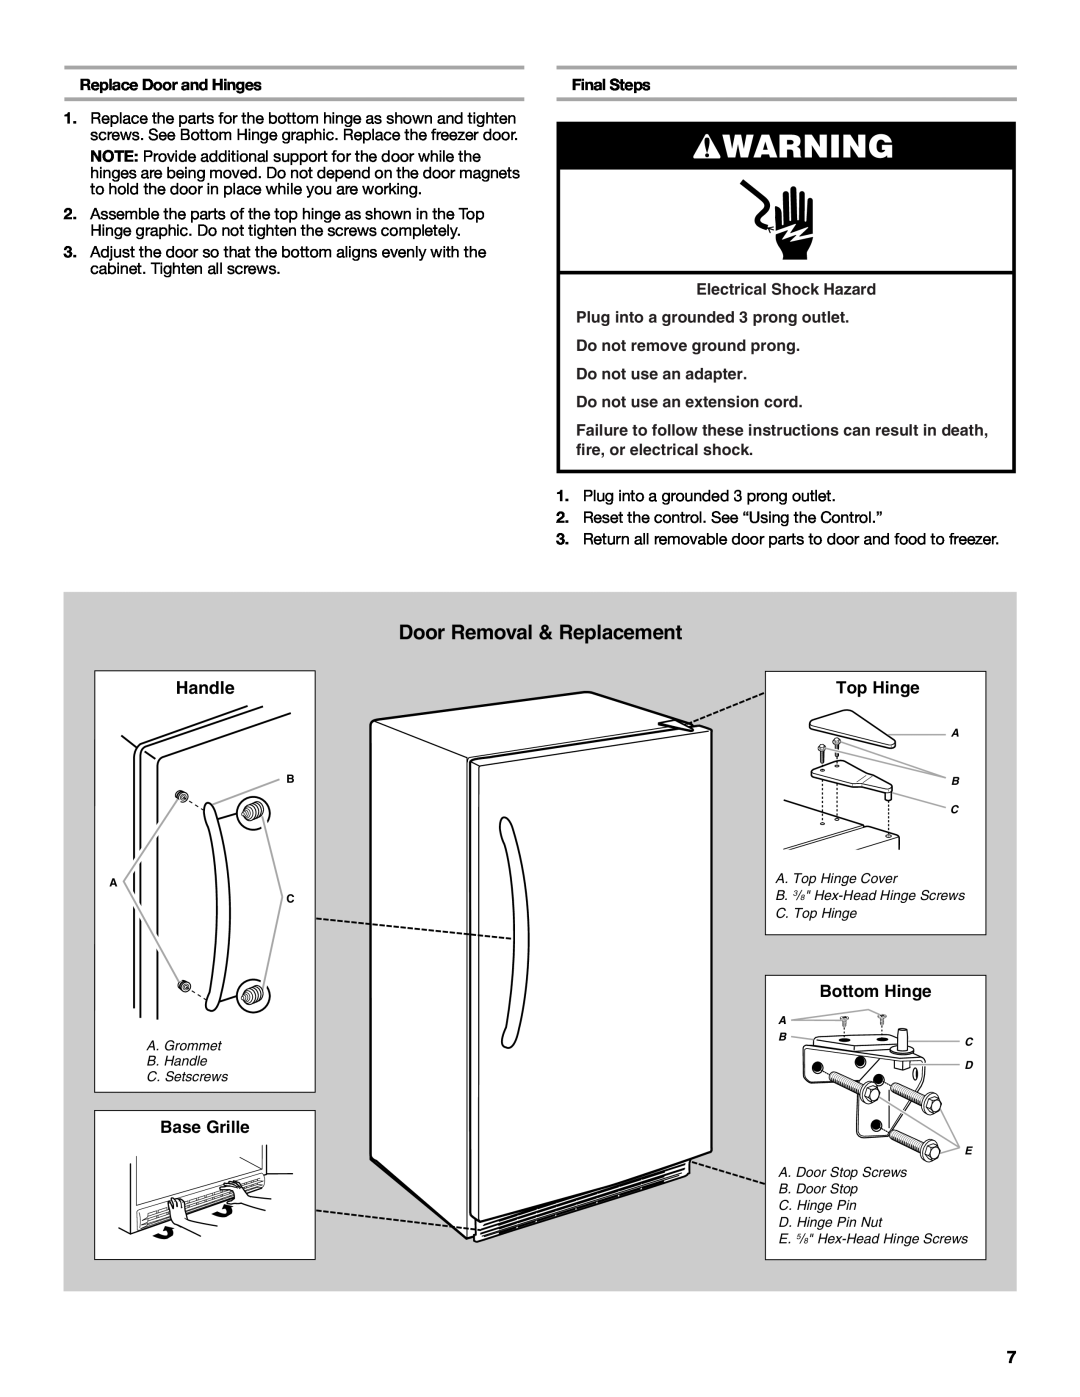 Whirlpool W10326801A Door Removal & Replacement, Handle, Top Hinge, Replace Door and Hinges, Final Steps, Base Grille 